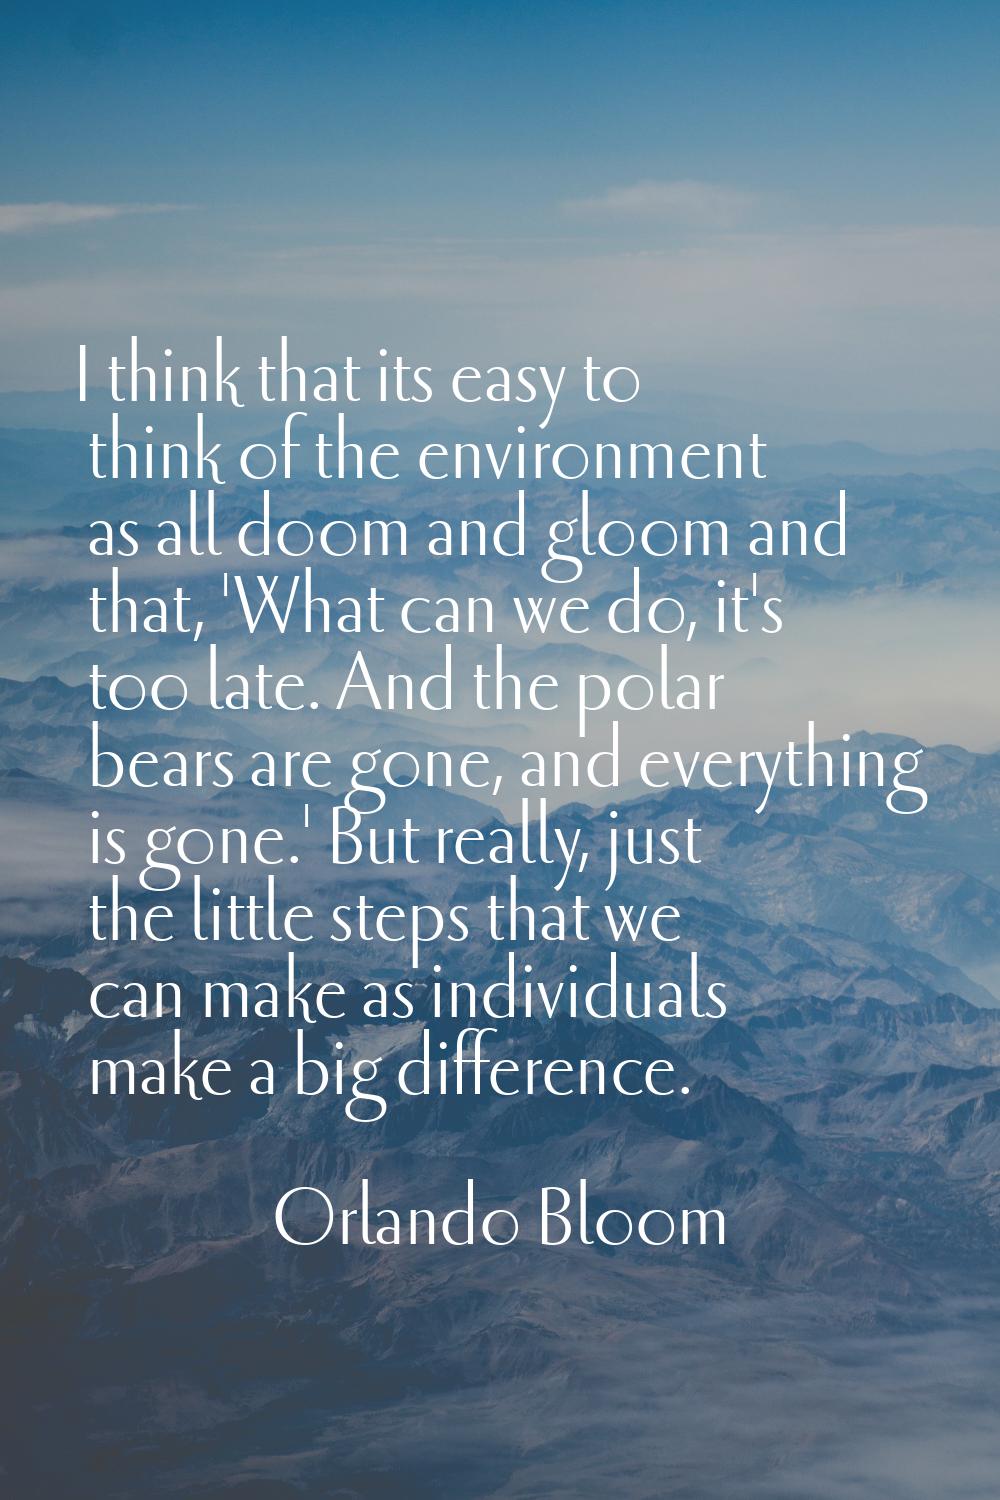 I think that its easy to think of the environment as all doom and gloom and that, 'What can we do, 